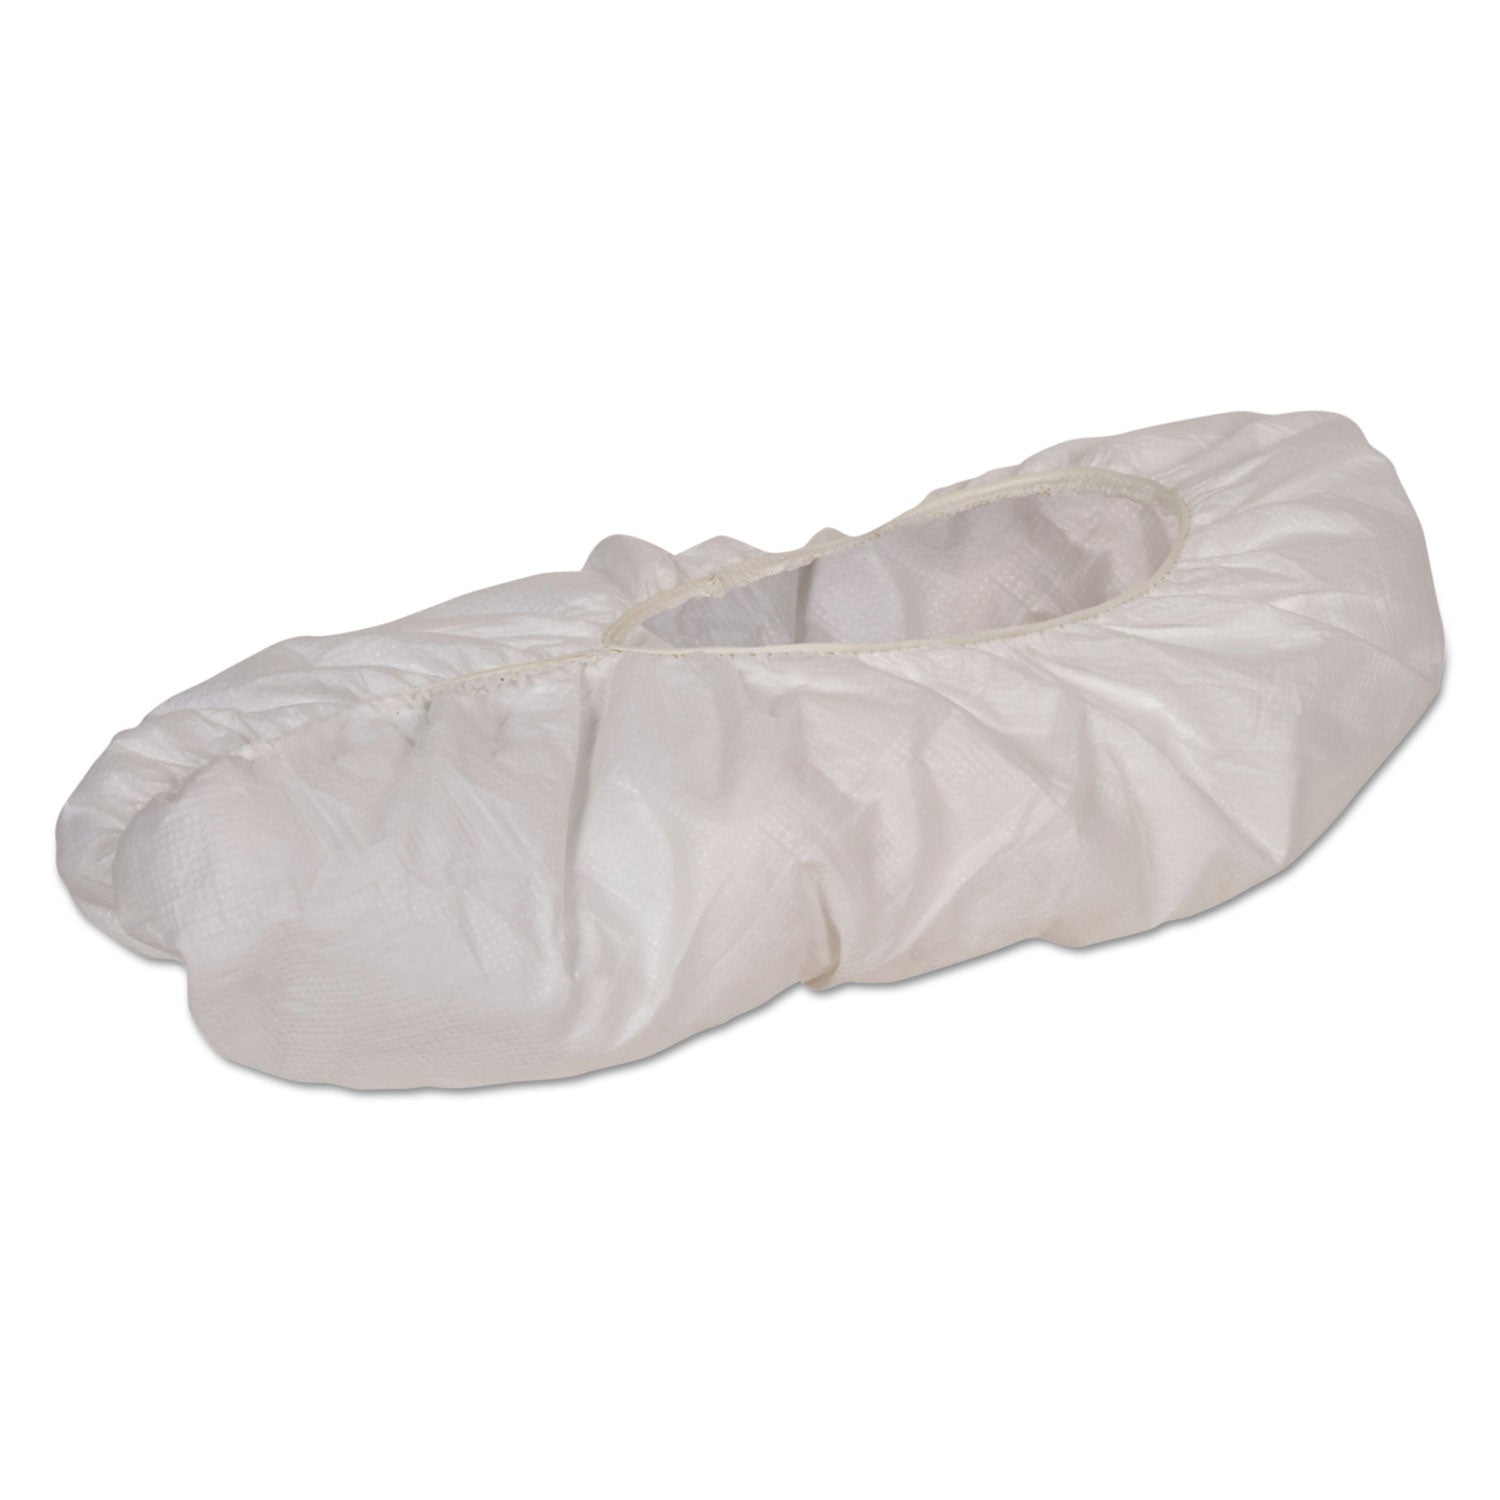 a40-shoe-covers-one-size-fits-all-white-400-carton_kcc44490 - 2